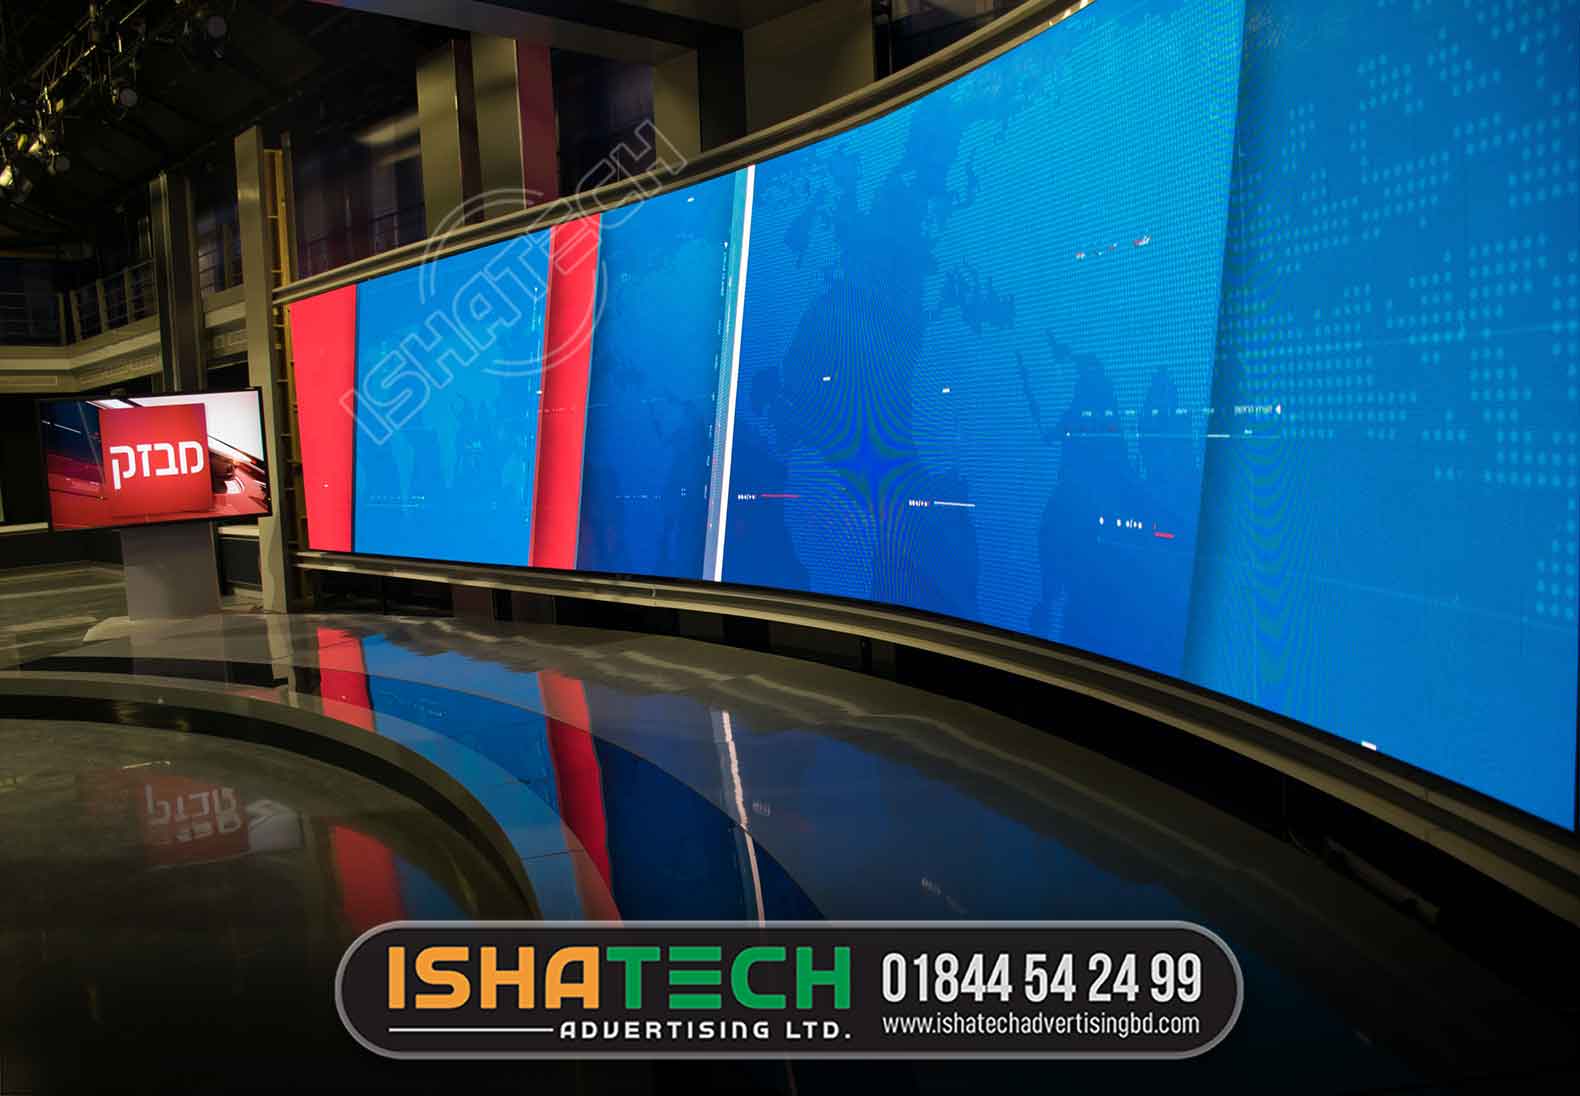 LED Video Wall Ensure Greater Attention with LED Video Wall Technology: The Latest Standard:: In the present era, people need a story to connect to your brand which can further help influence their decision-making process. These bright, LED Video Wall are capable of narrating your brand’s story to the audience making sure the required impact is made. LED Video Wall High Resolutions Display Other than the fact that these LED Video Wall displays are cost-effective, their high-resolution display does not fade out even from larger distances making it viable for great performance for years. Moreover, content management can be controlled either centrally or locally from remote devices, which makes it easier for the staff to update information whenever required. Taking an example of stock exchange markets, or even airports, these LED Video Wall are a perfect fit considering the frequently updated information on a timely basis.